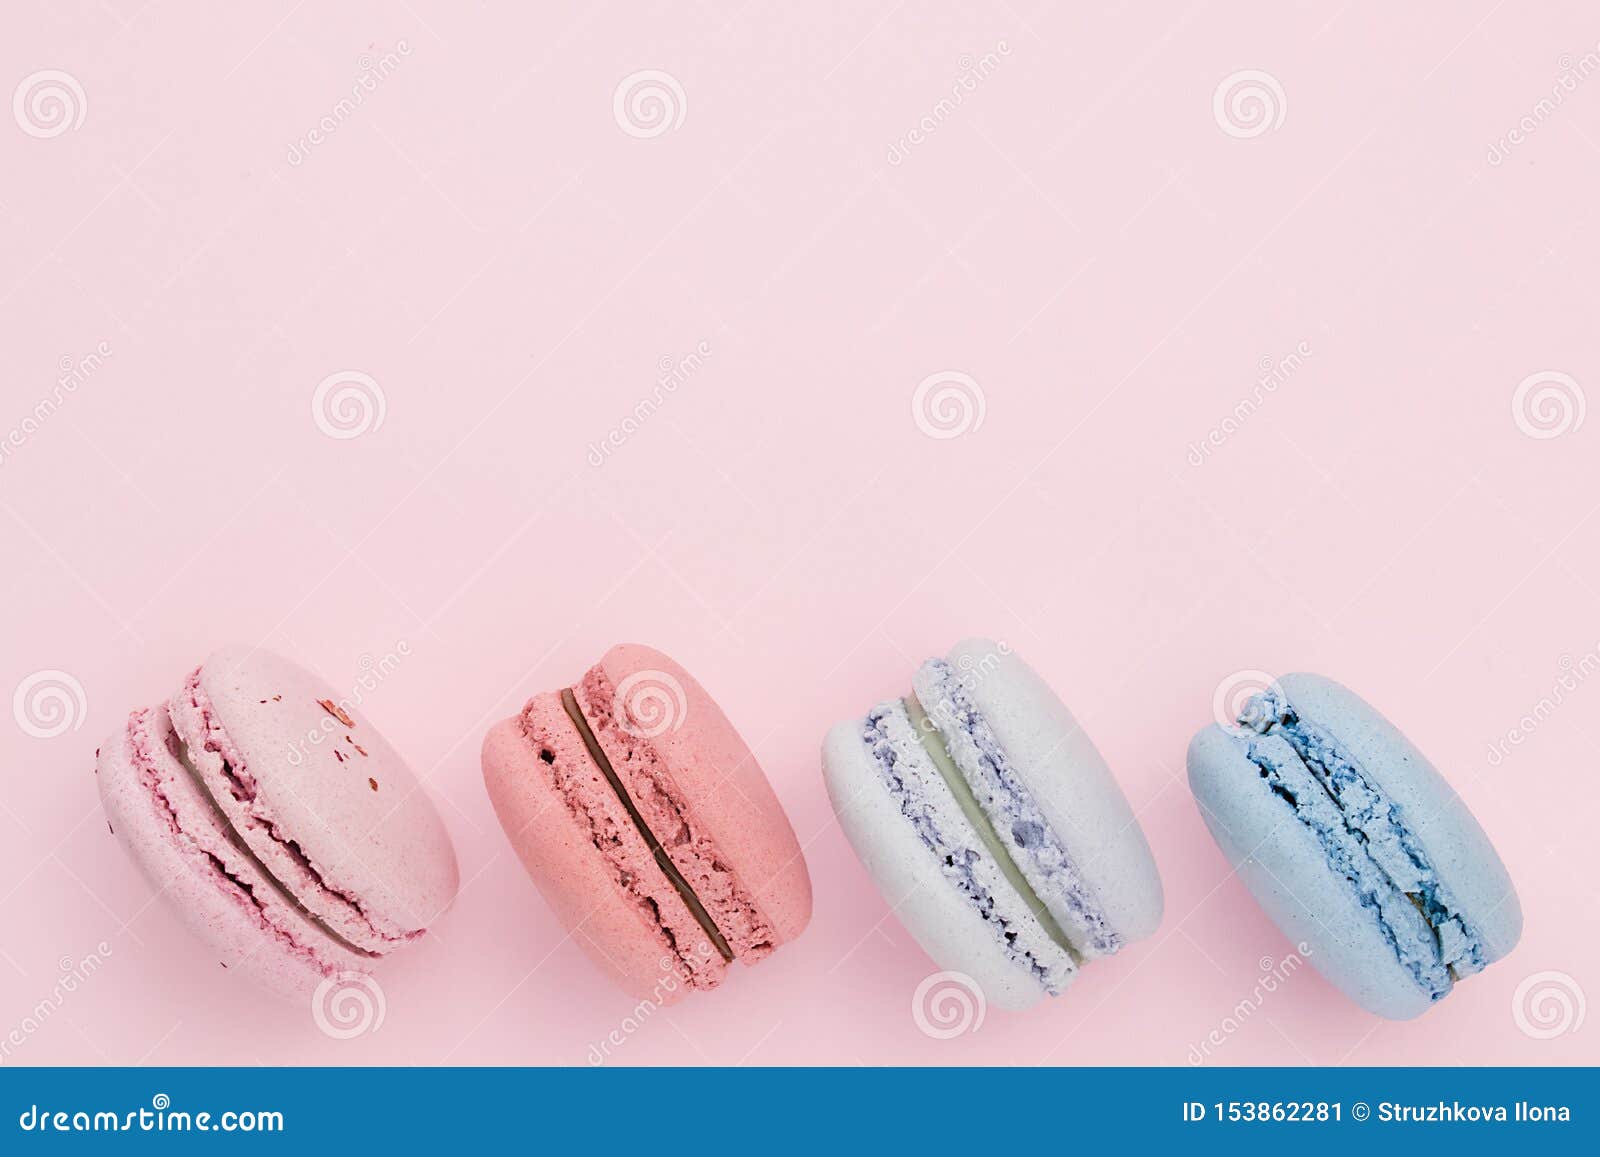 Beautiful Macaroons on the Pastel Pink Background. Horizontal Color Image  Stock Image - Image of french, design: 153862281